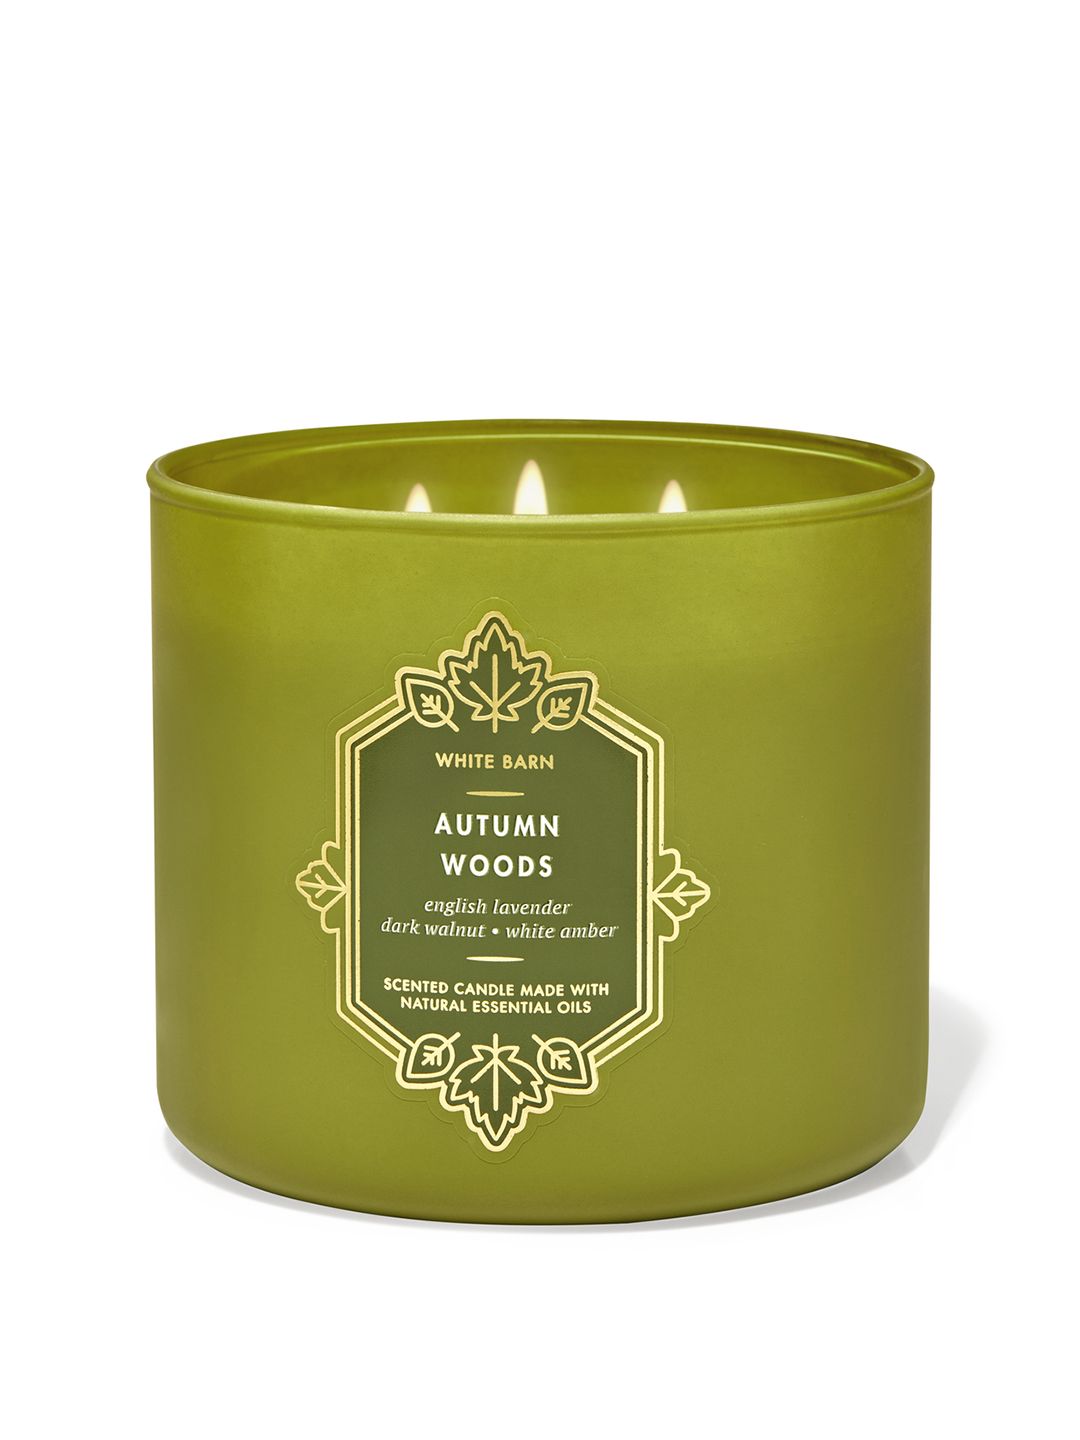 Bath & Body Works Autumn Woods 3-Wick Scented Candle with Essential Oils - 411g Price in India